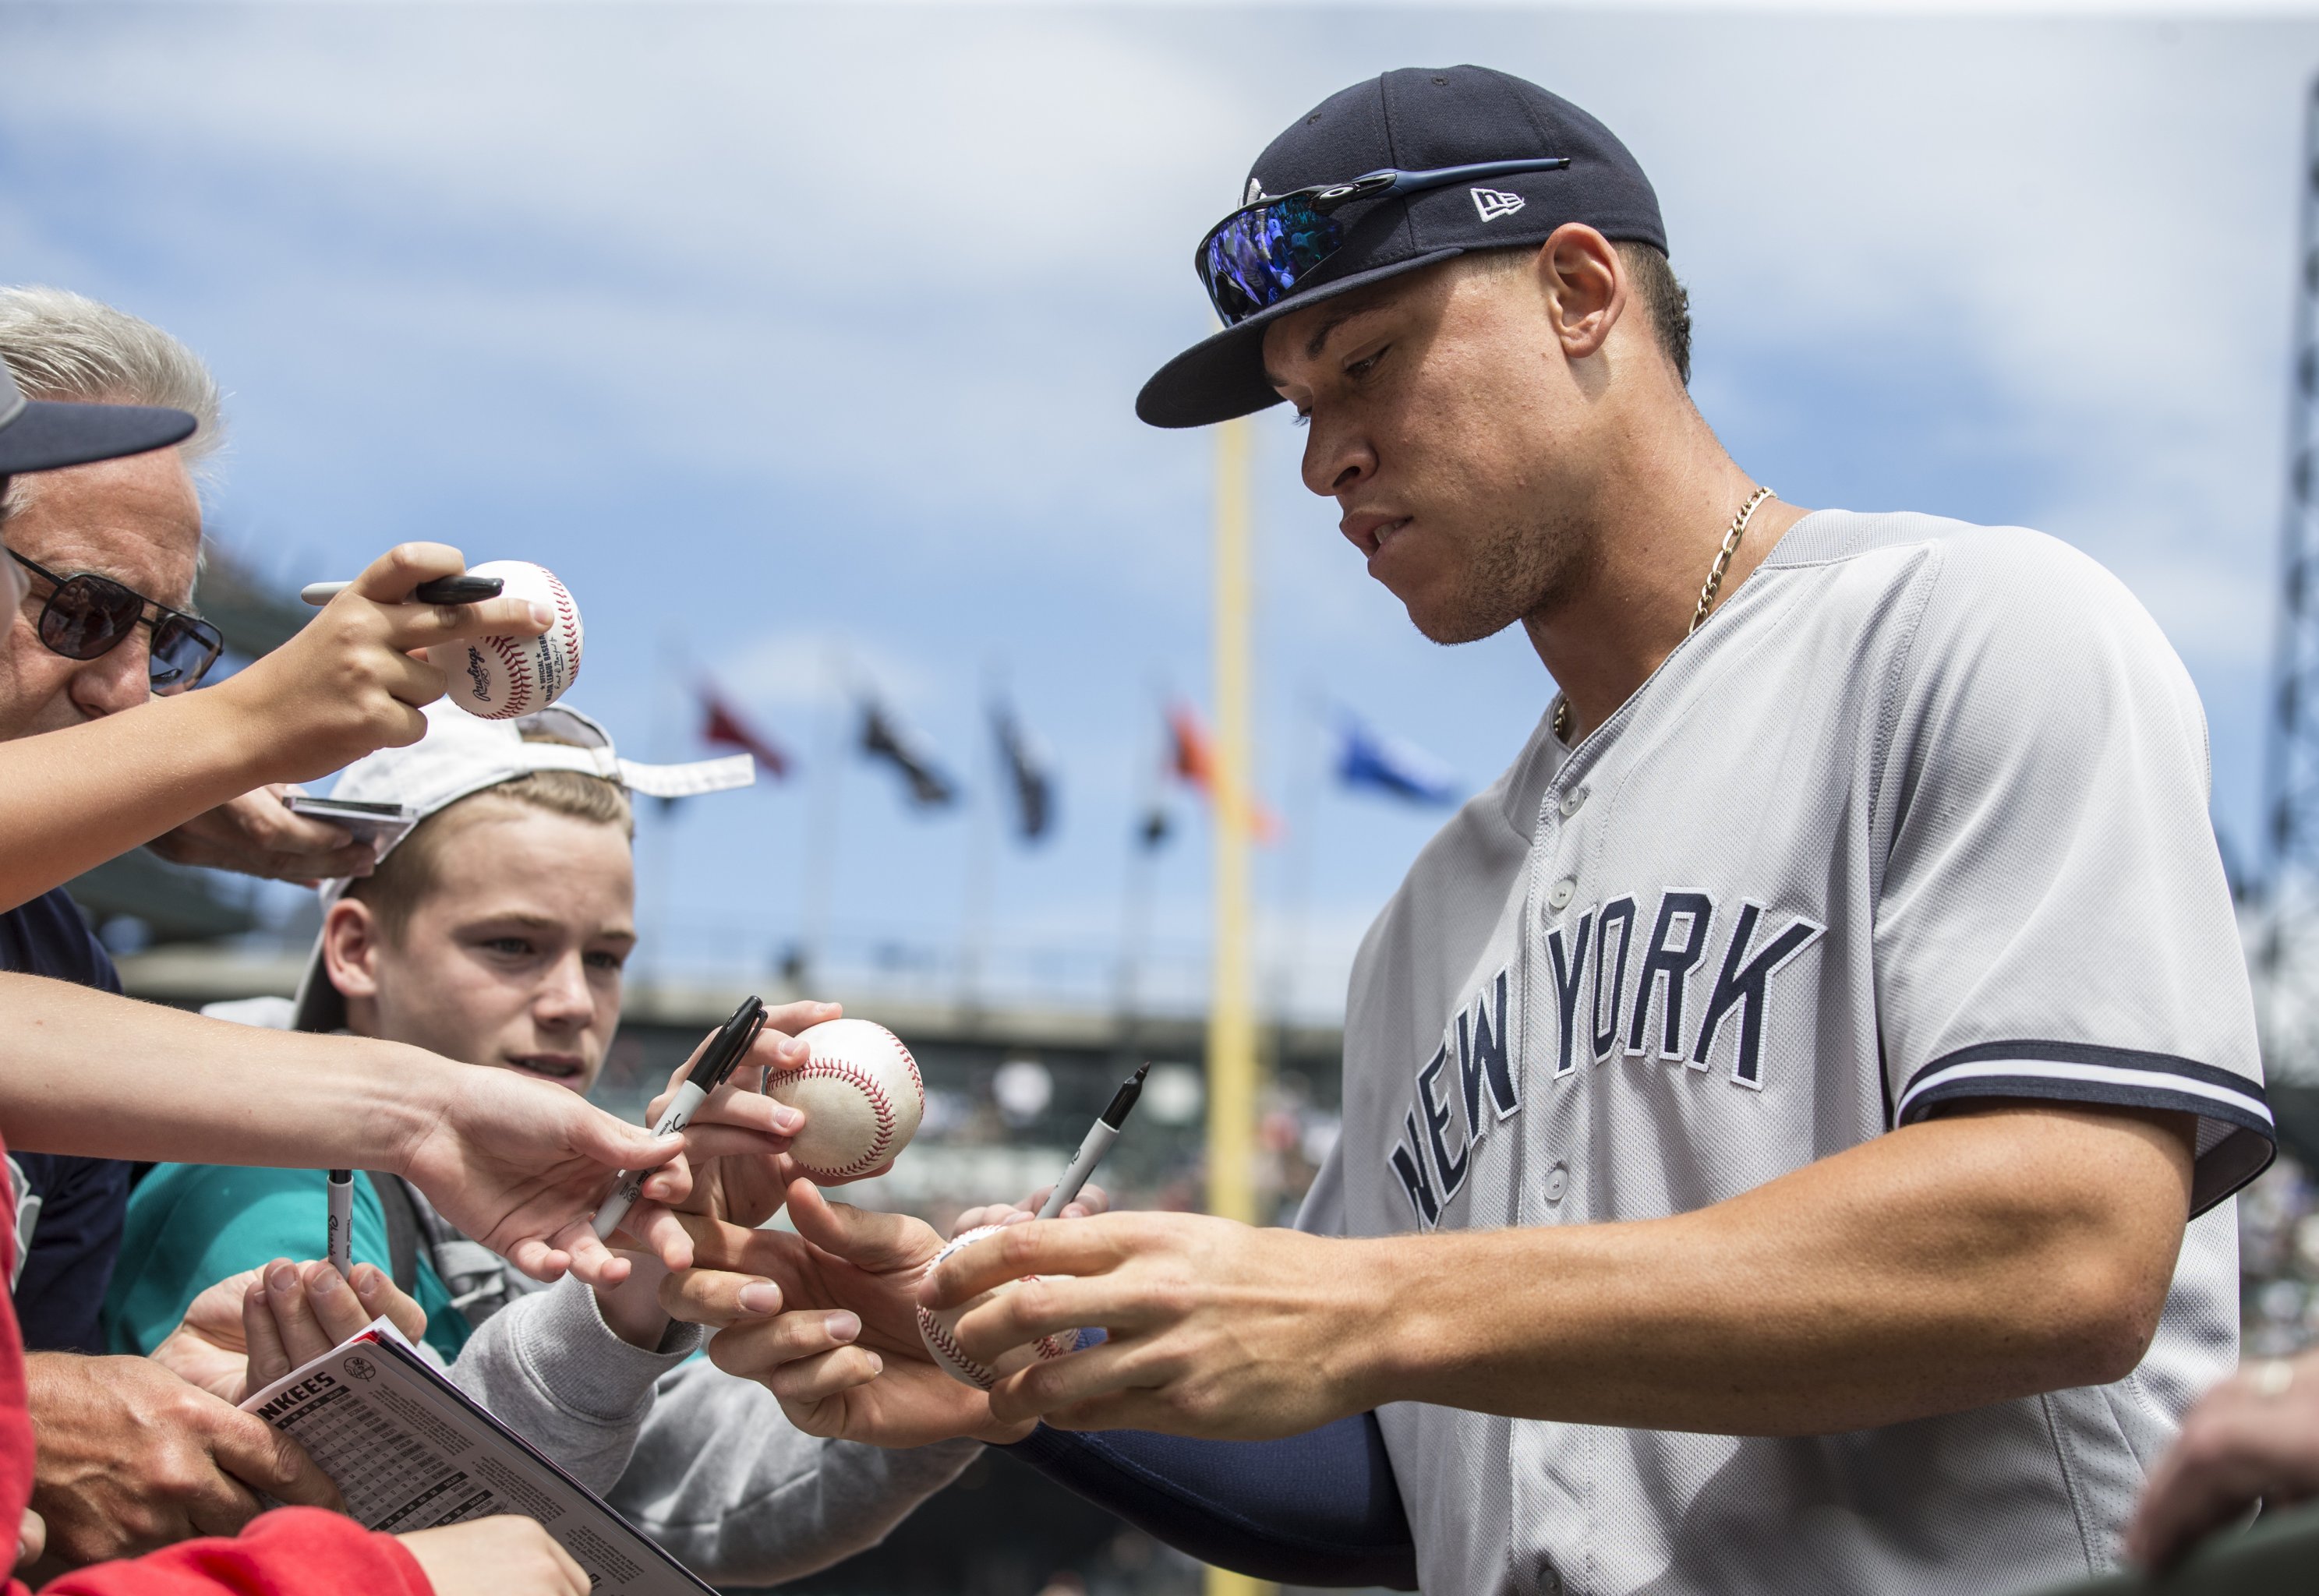 Yankees rookie Aaron Judge's hot start leads to spike in jersey sales